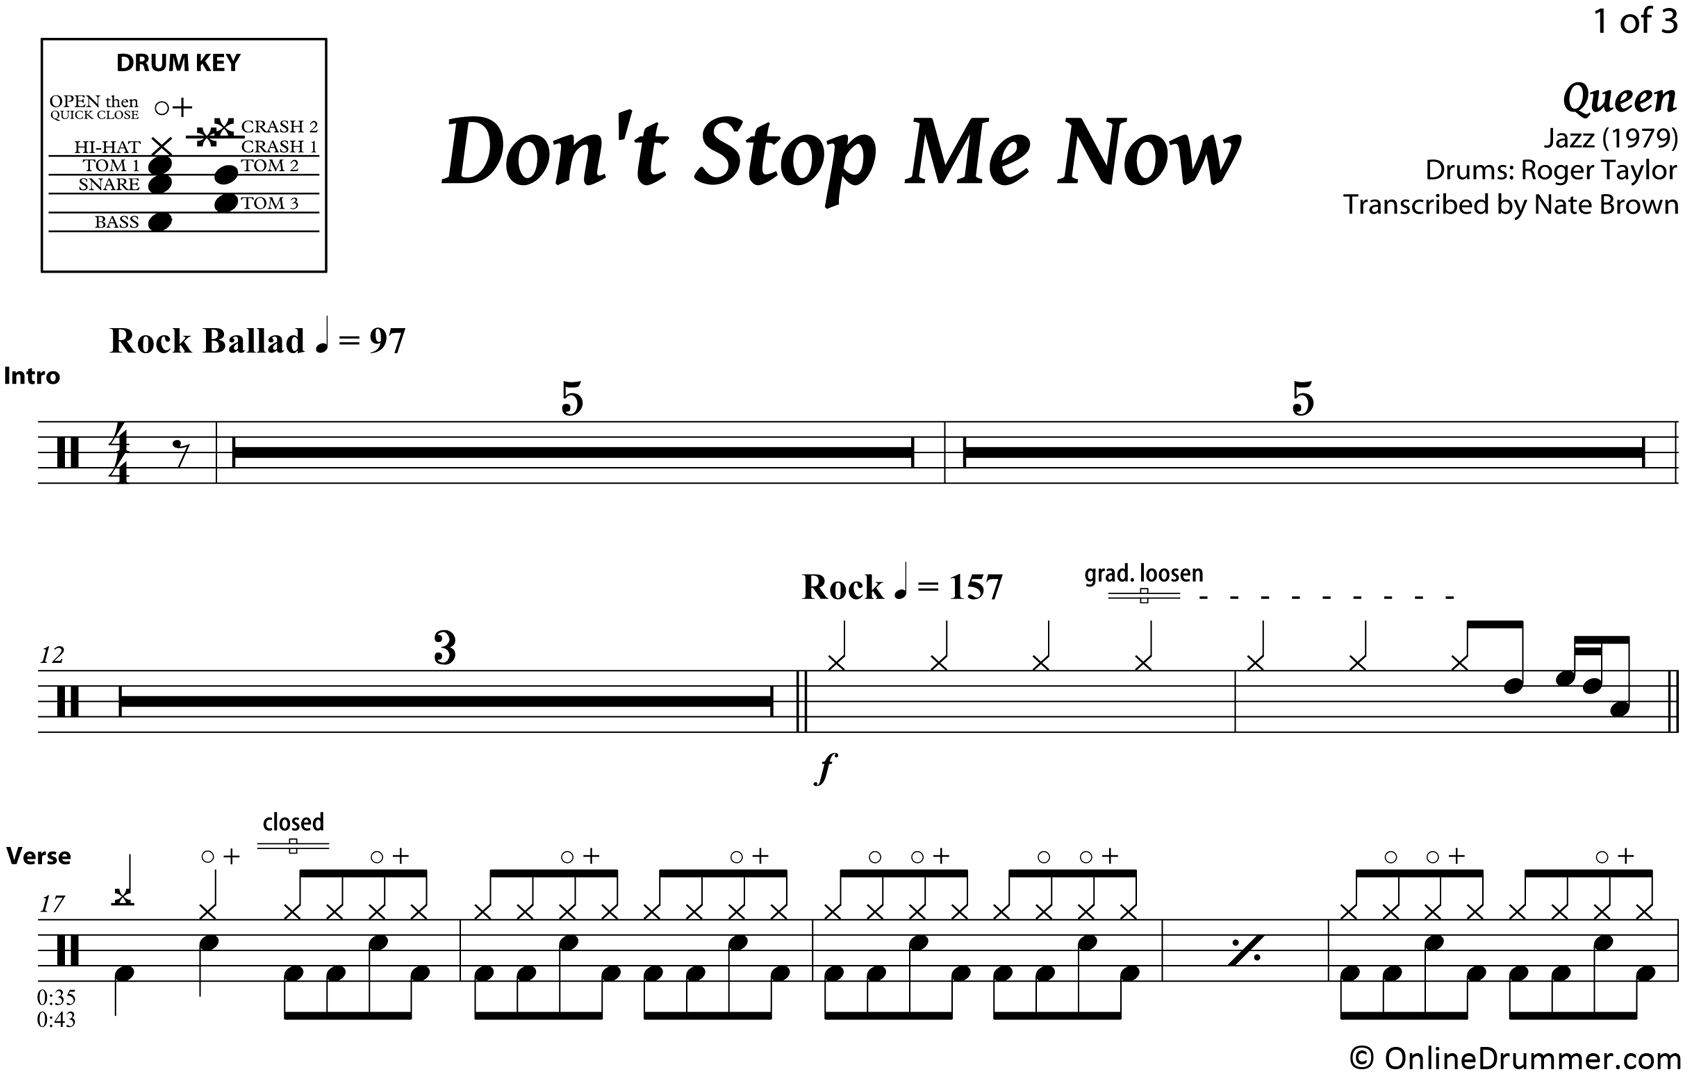 Don't Stop Me Now - Queen - Drum Sheet Music